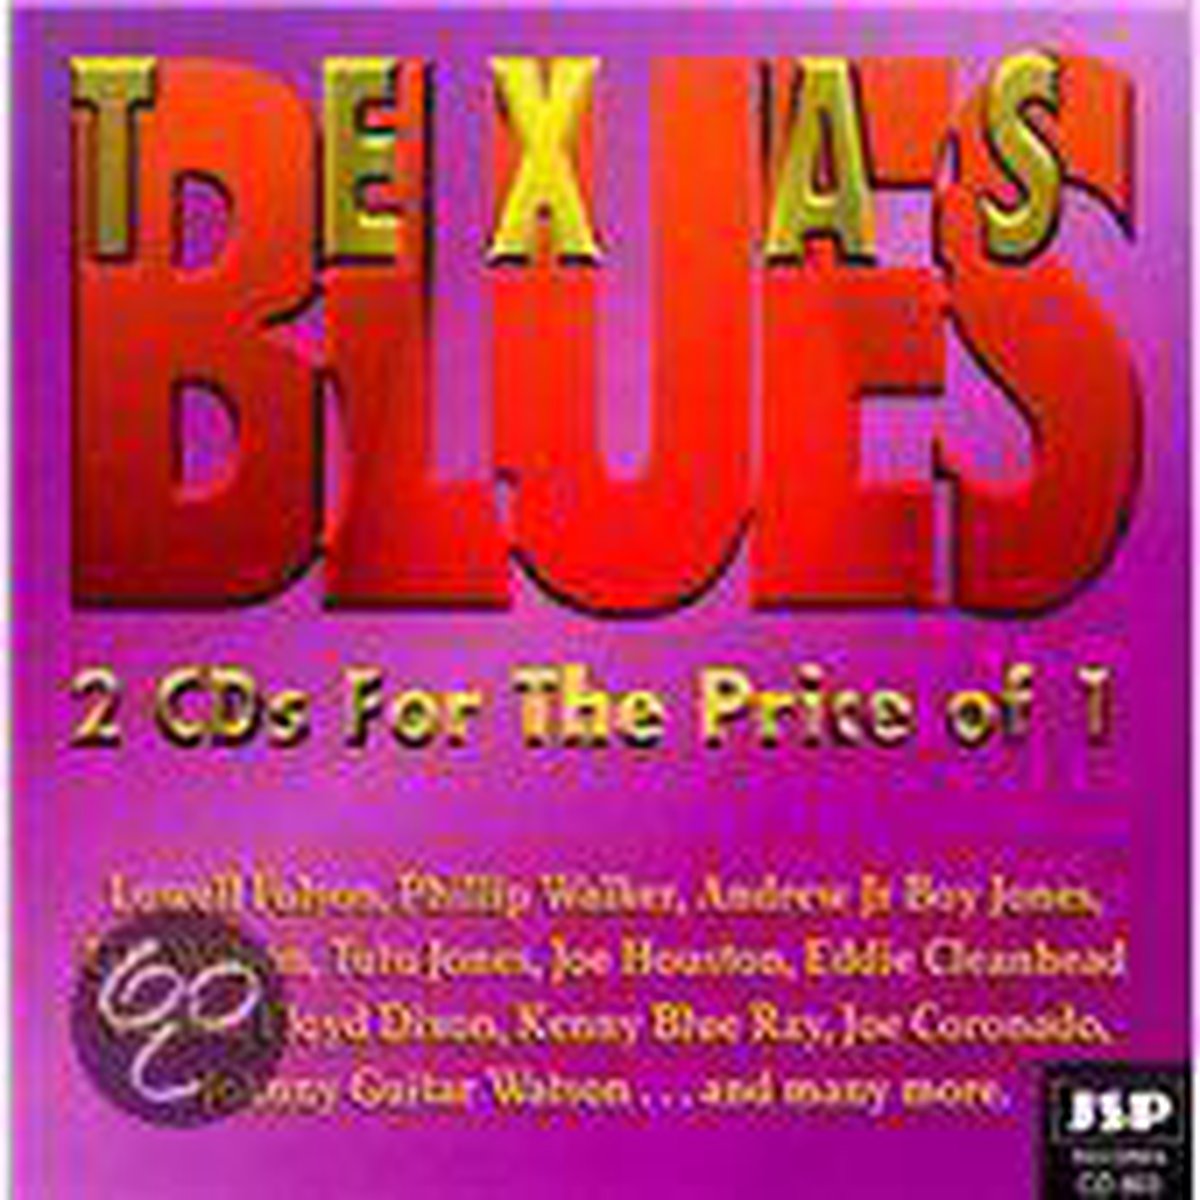 Texas Blues: The Gold Star Sessions - various artists